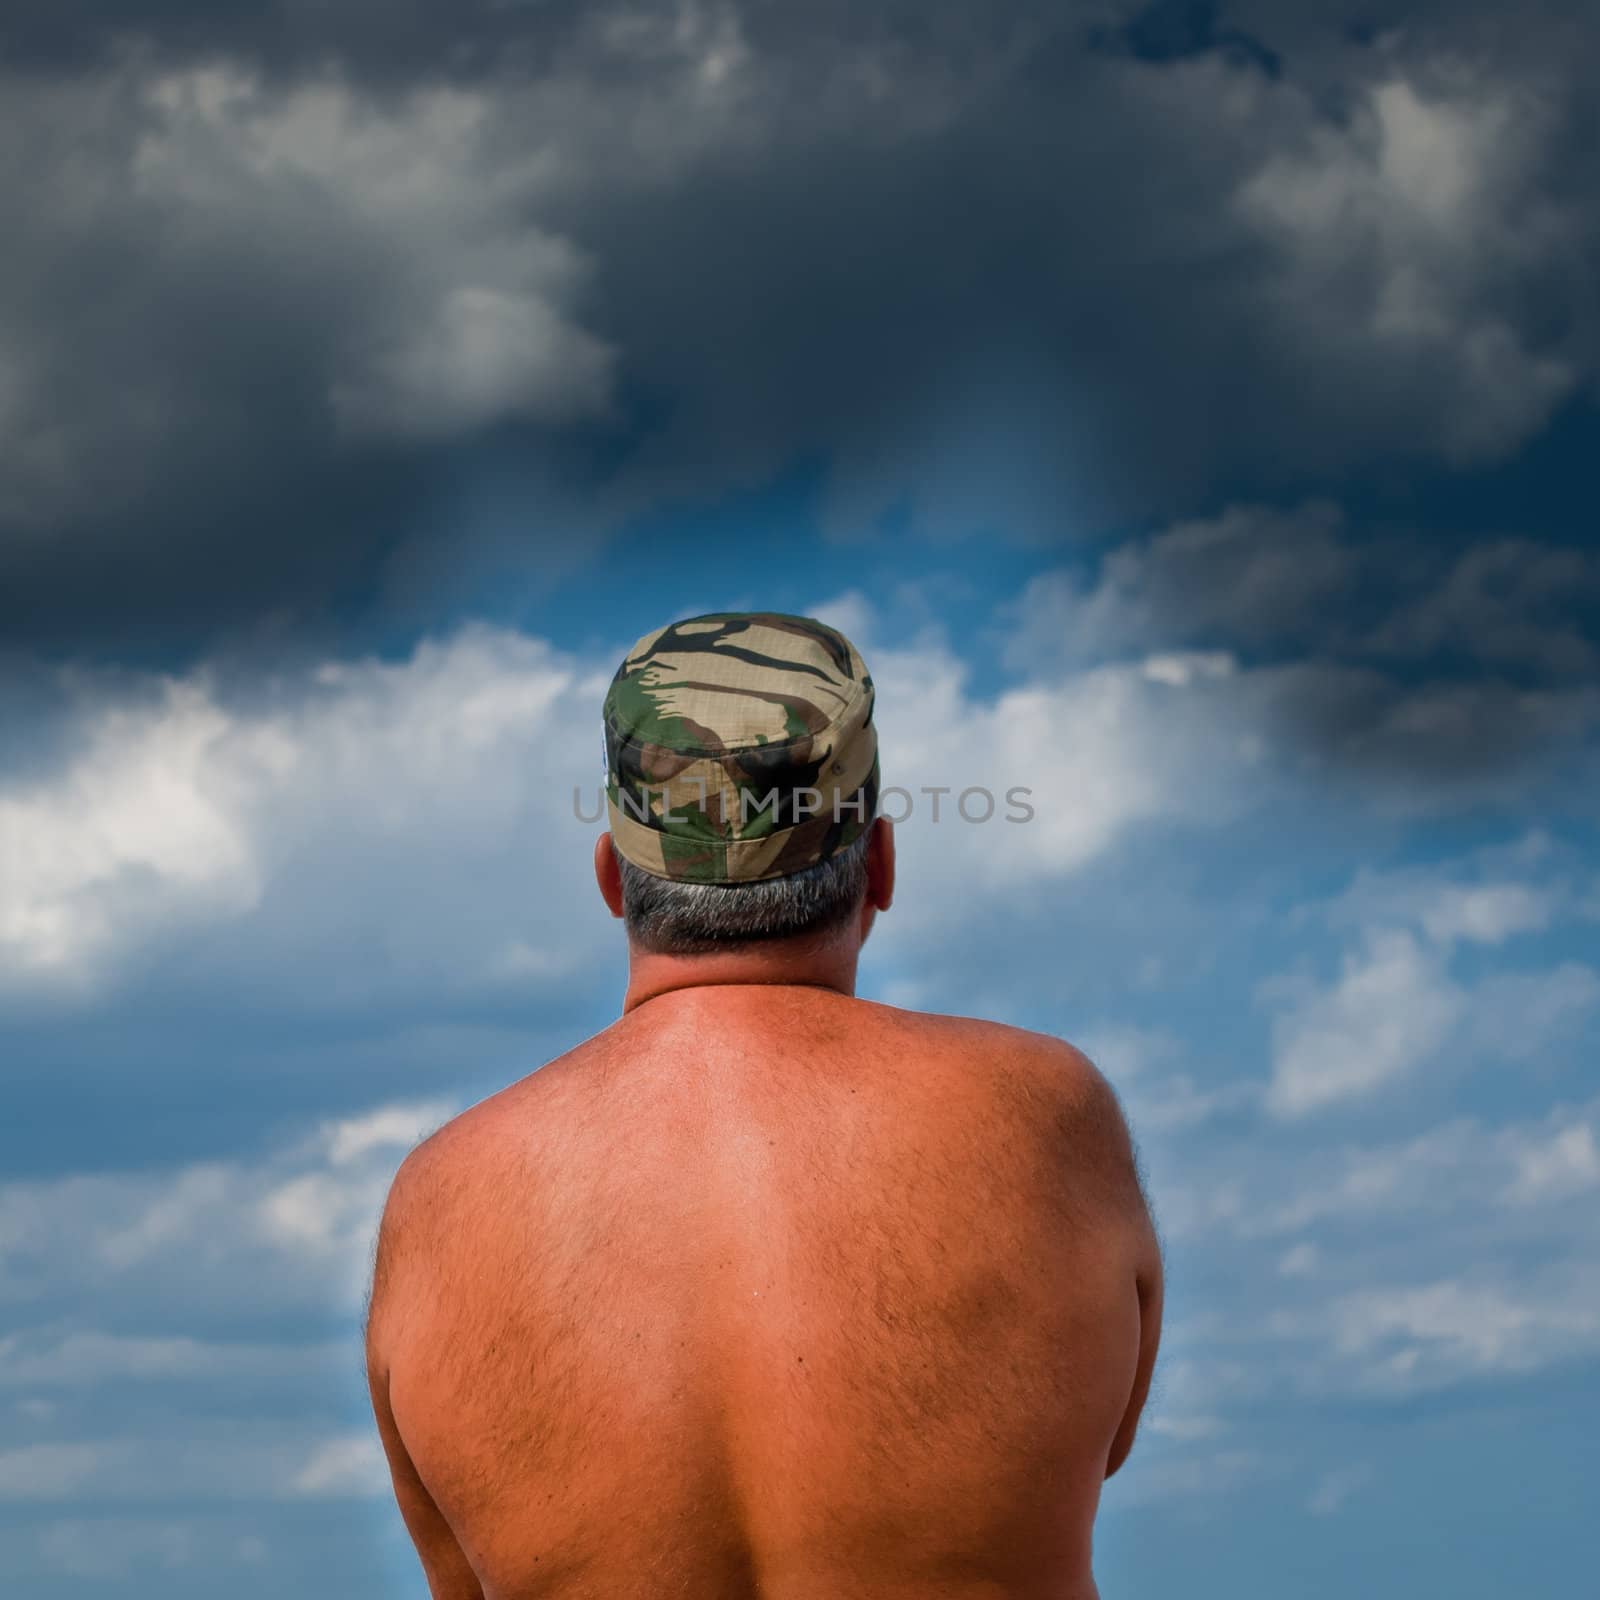 Army man waiting for the storm by betterinall